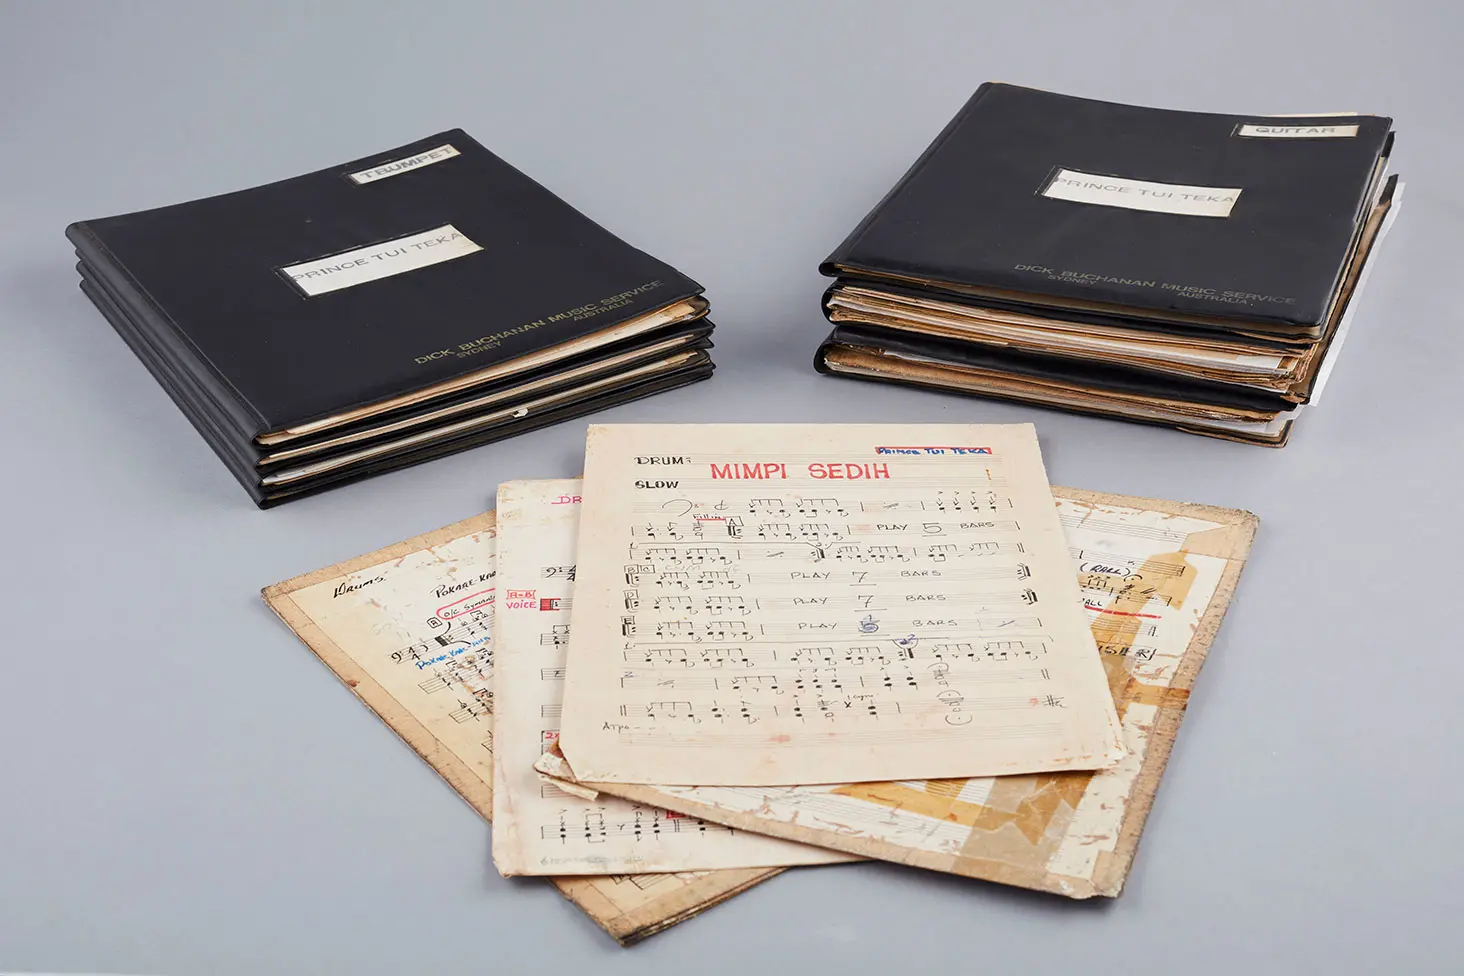 Colour studio photo of musical arrangements by Prince Tui Teka, showing 4 music sheets placed beside 2 folios.